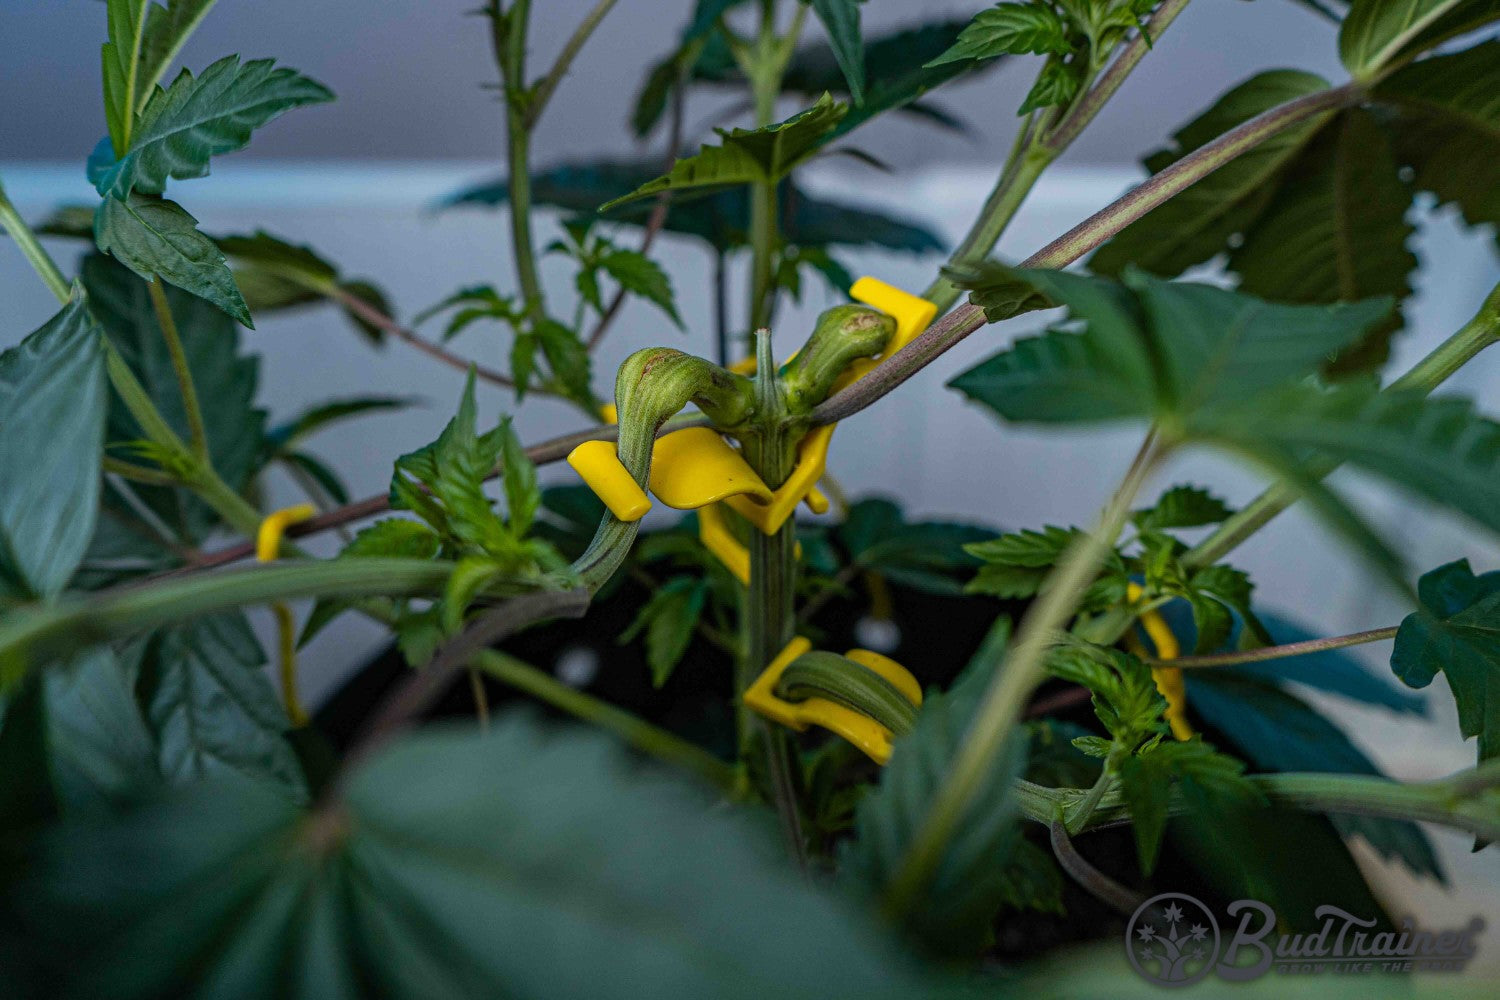 Cannabis plant branches being trained with multiple yellow BudClips, showing the branches spread and secured for optimal growth, with the BudTrainer logo in the bottom right corner.